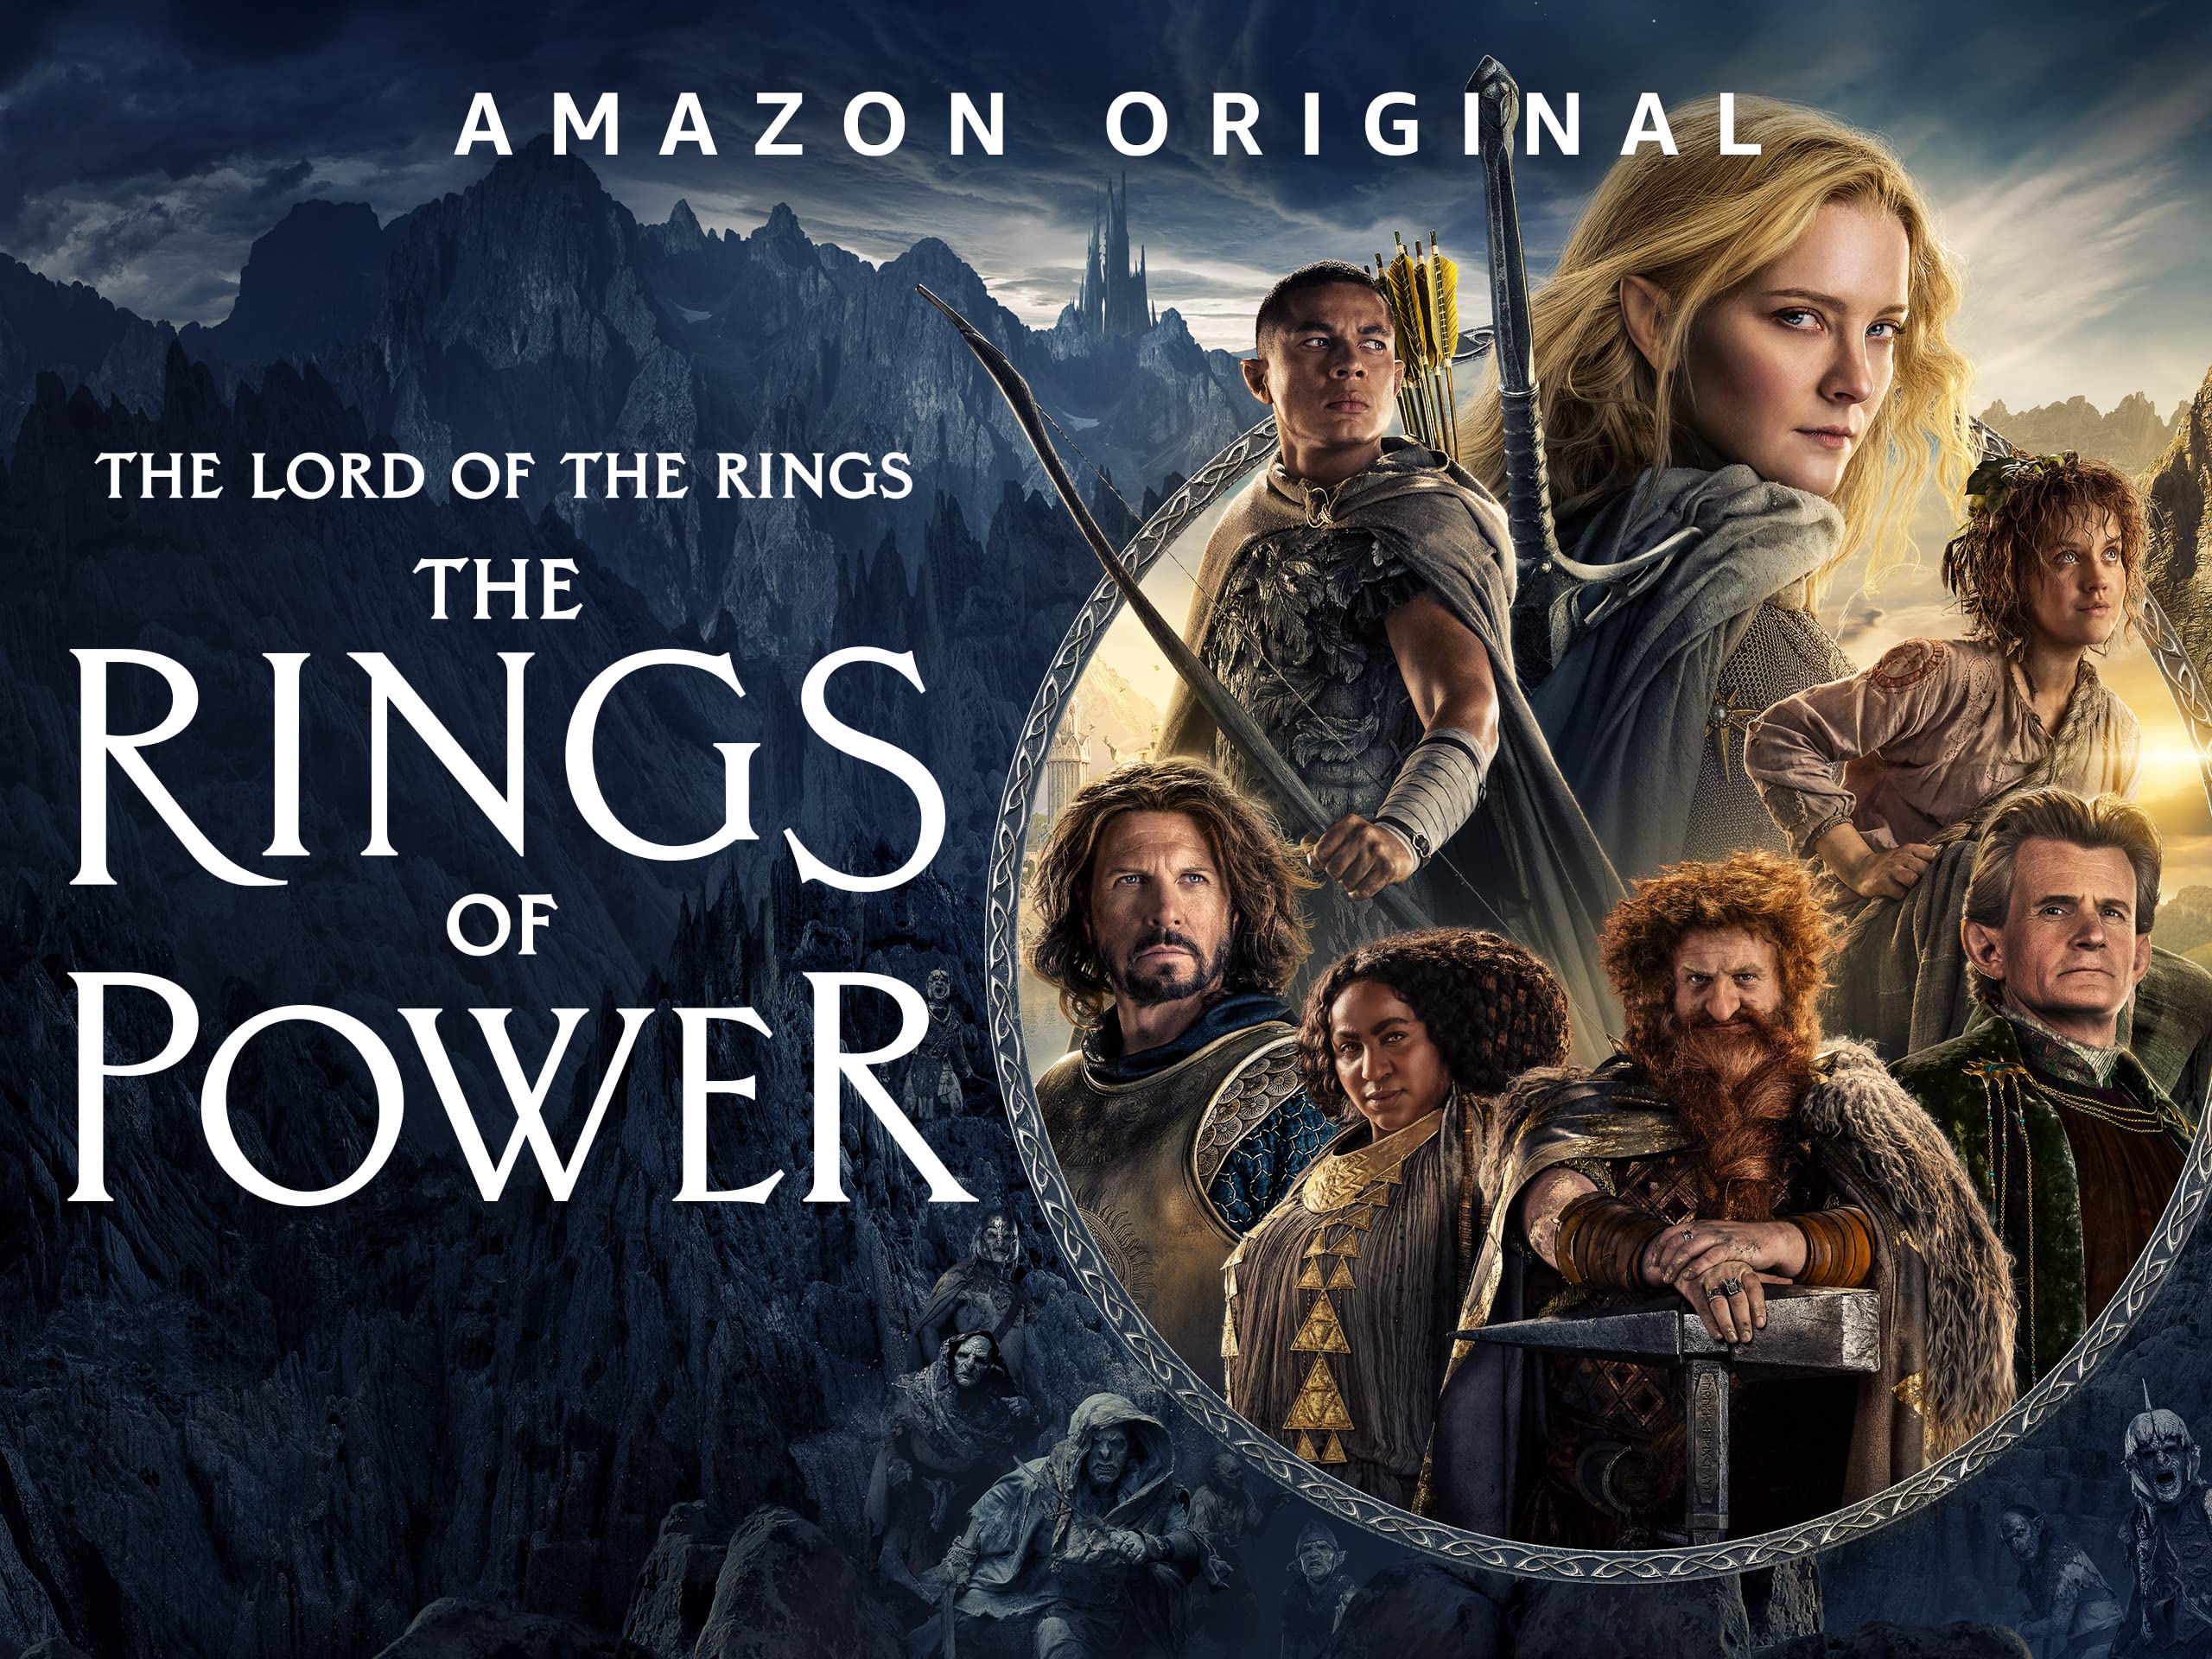 Was that a Balrog? 'Rings of Power' changes Tolkien canon for the better